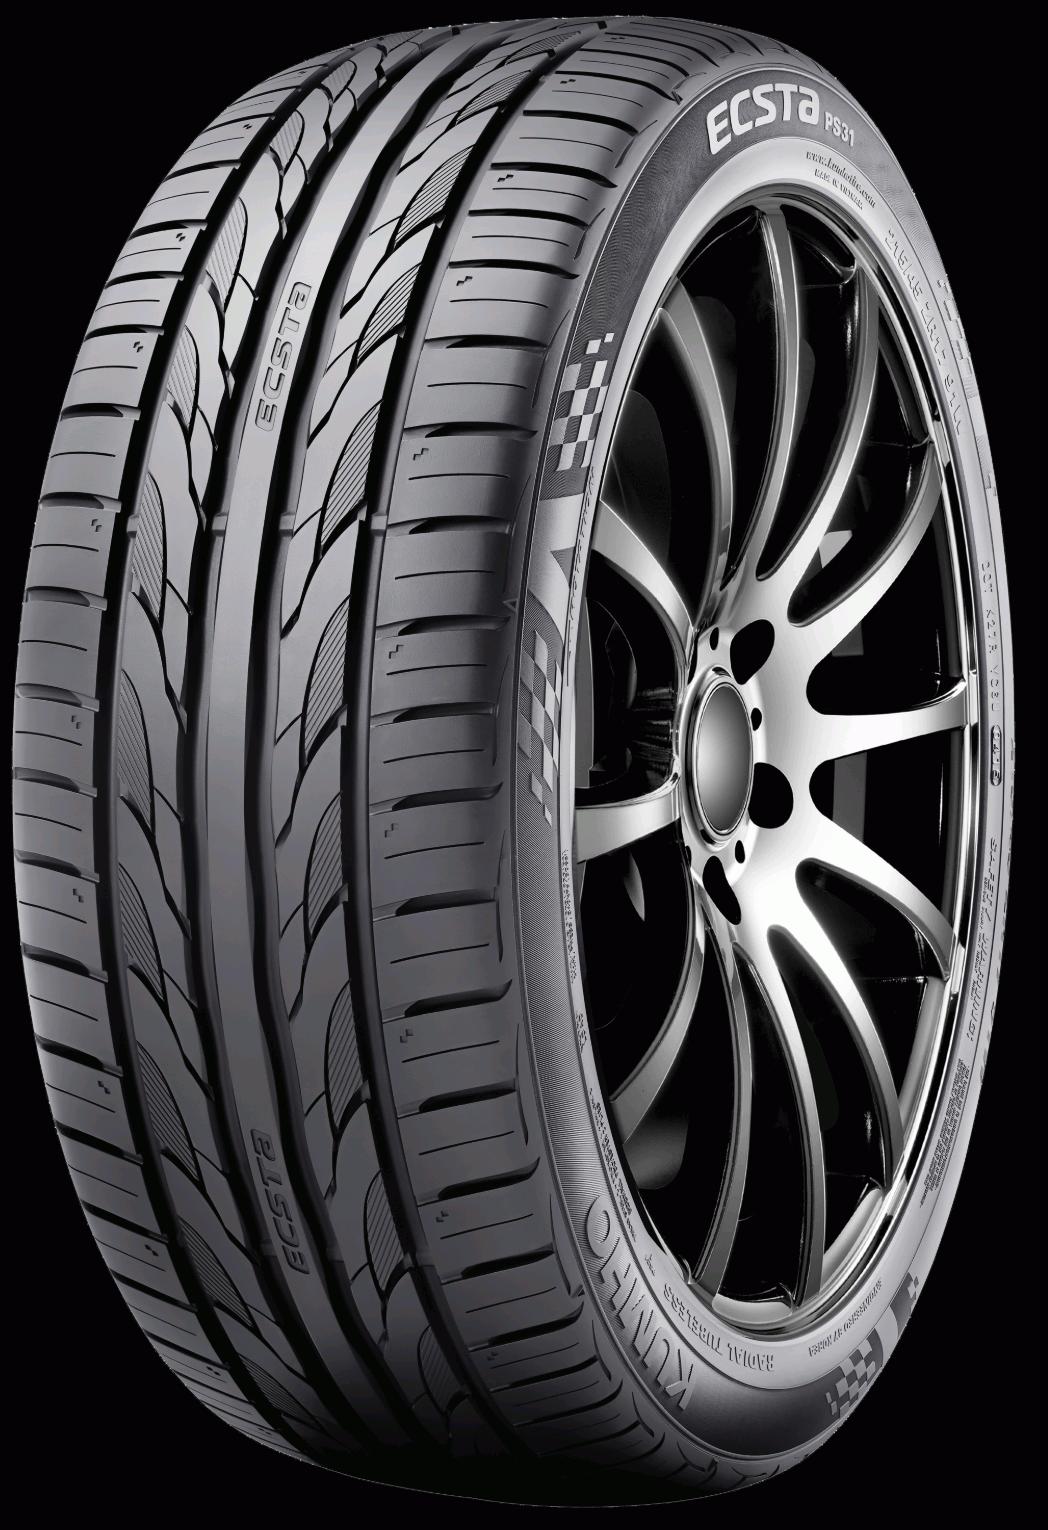 Kumho Ecsta Reviews - Tests PS31 Tyre and